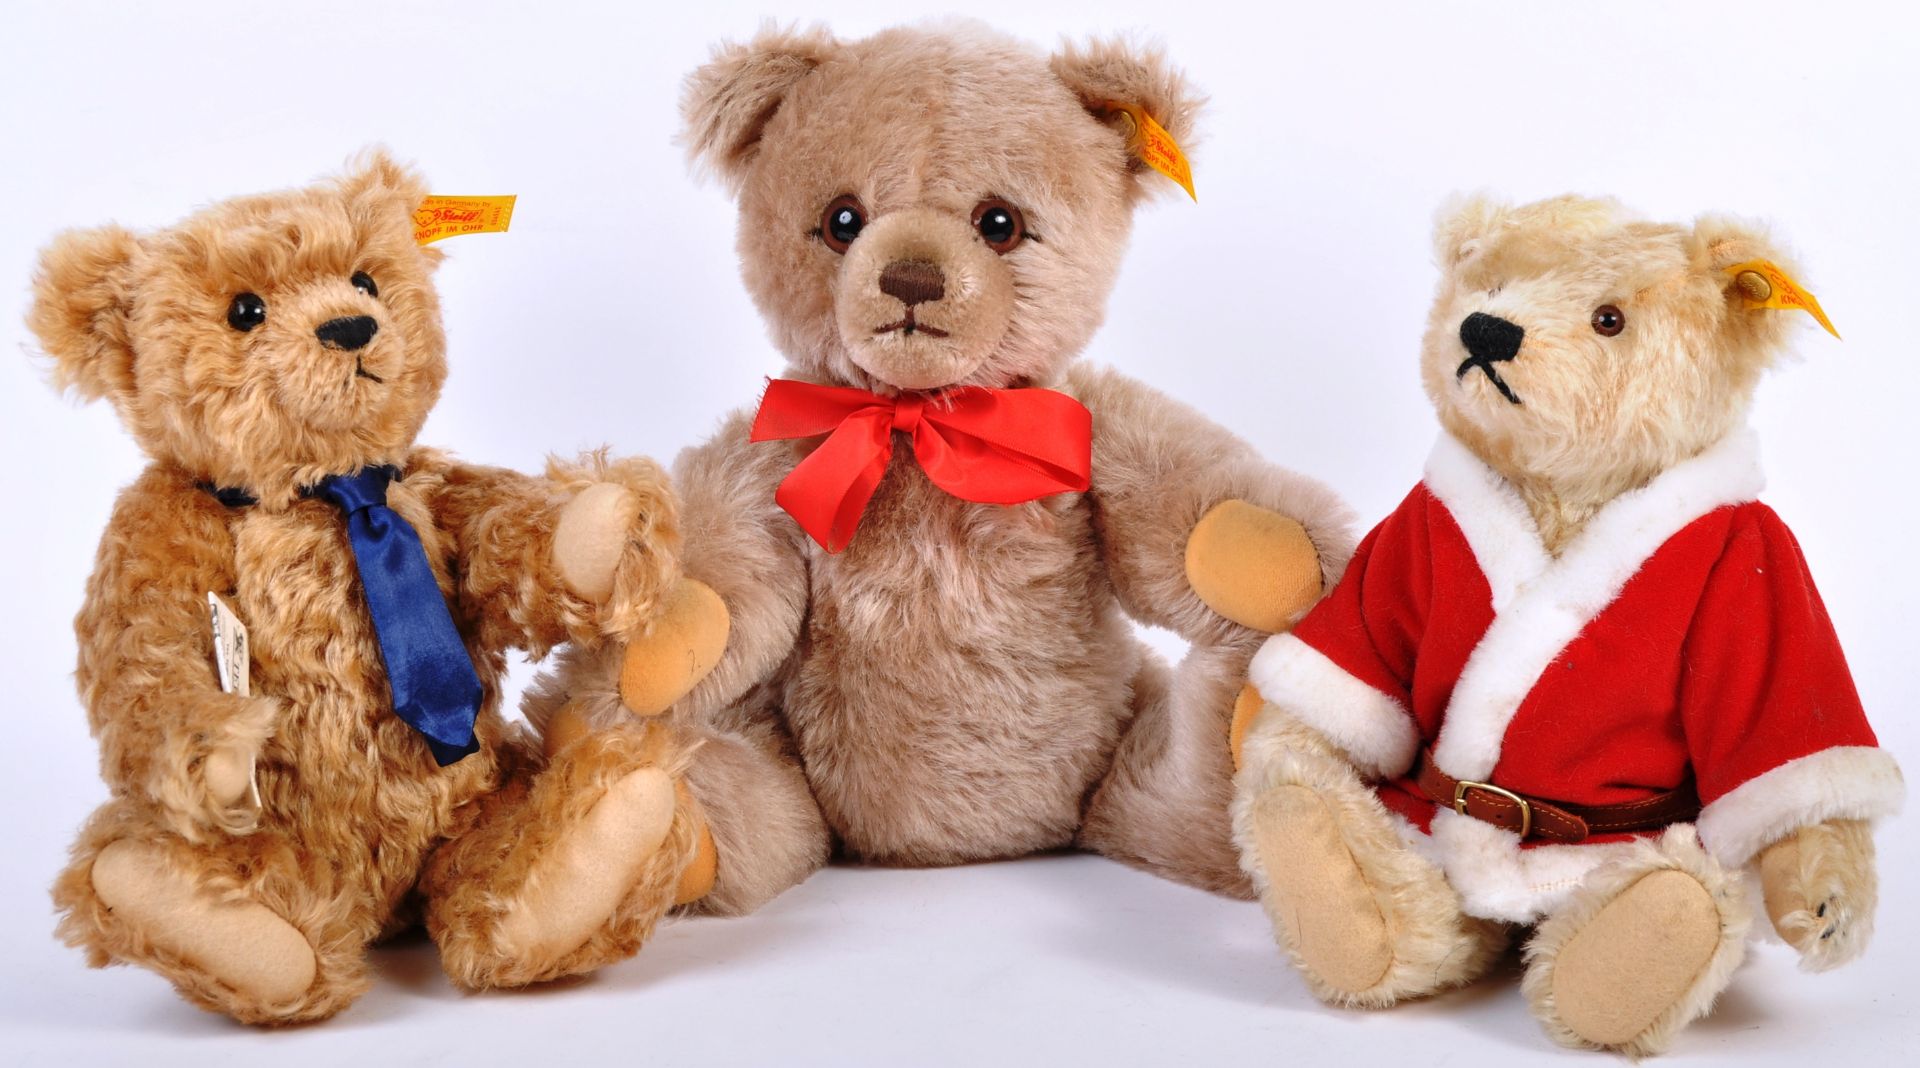 COLLECTION OF ORIGINAL STEIFF SOFT TOY TEDDY BEARS